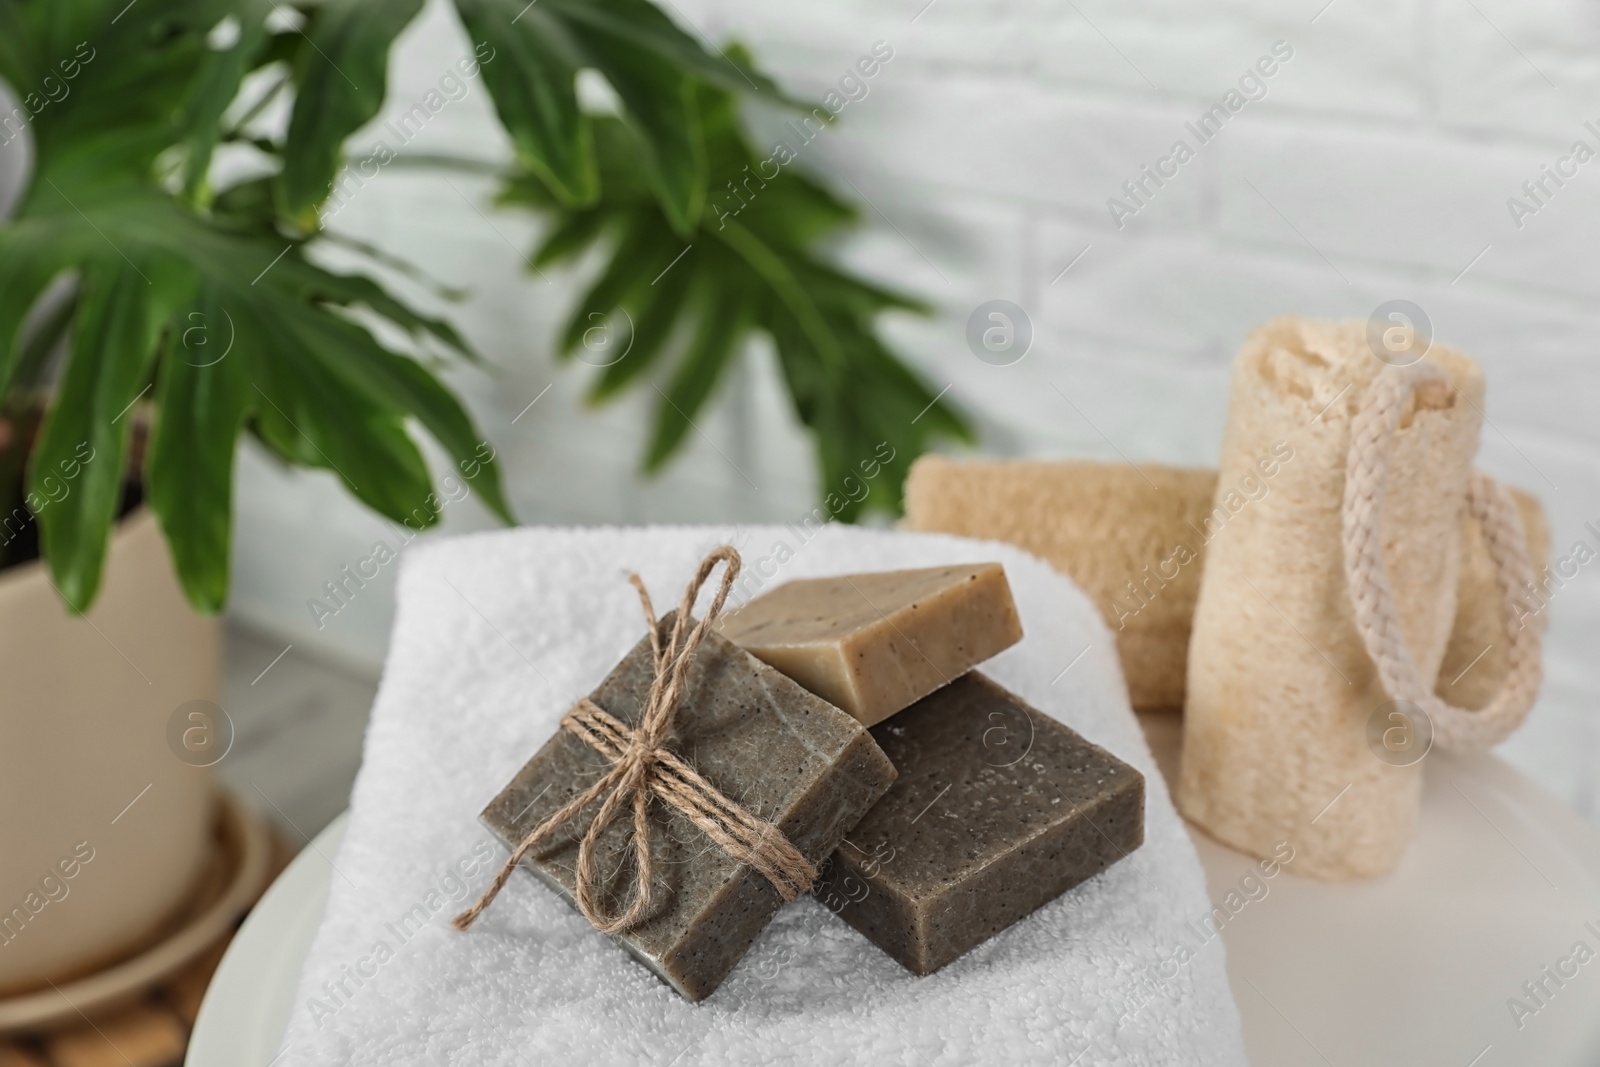 Photo of Handmade soap bars on white towel against blurred background